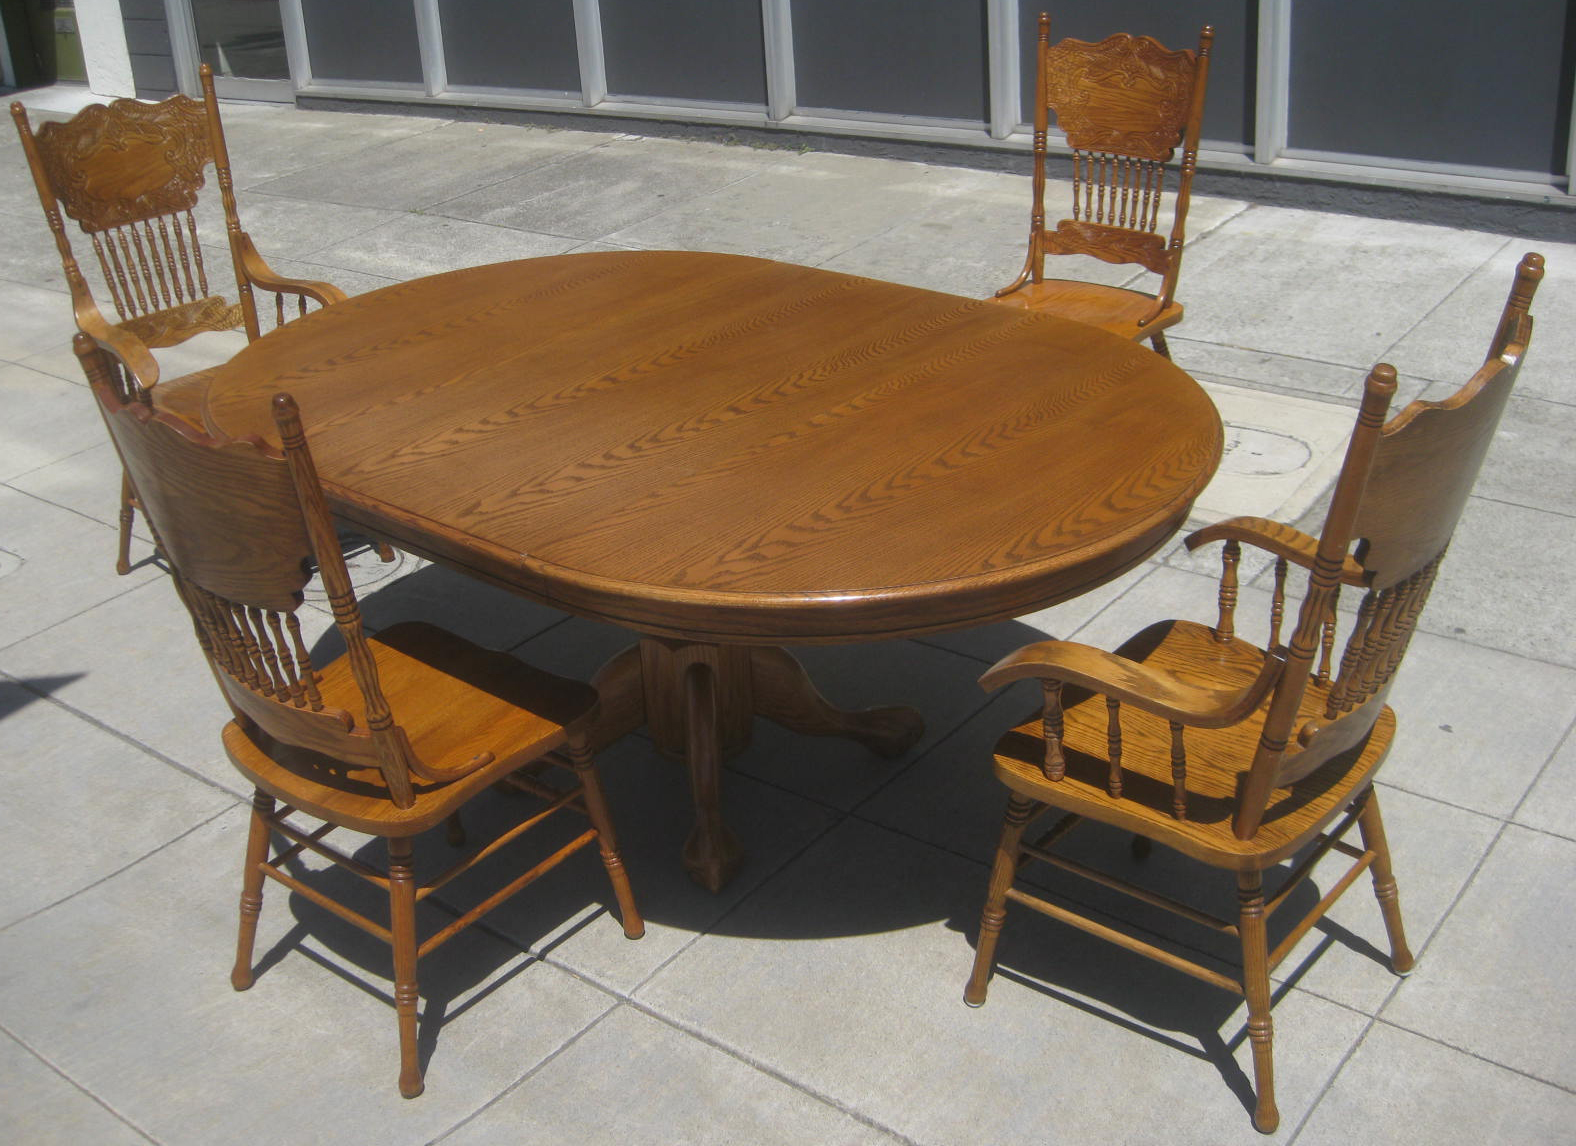 UHURU FURNITURE & COLLECTIBLES: SOLD - Oak Pedestal Dining Table + Leaf + 4 Chairs - $1451576 x 1146